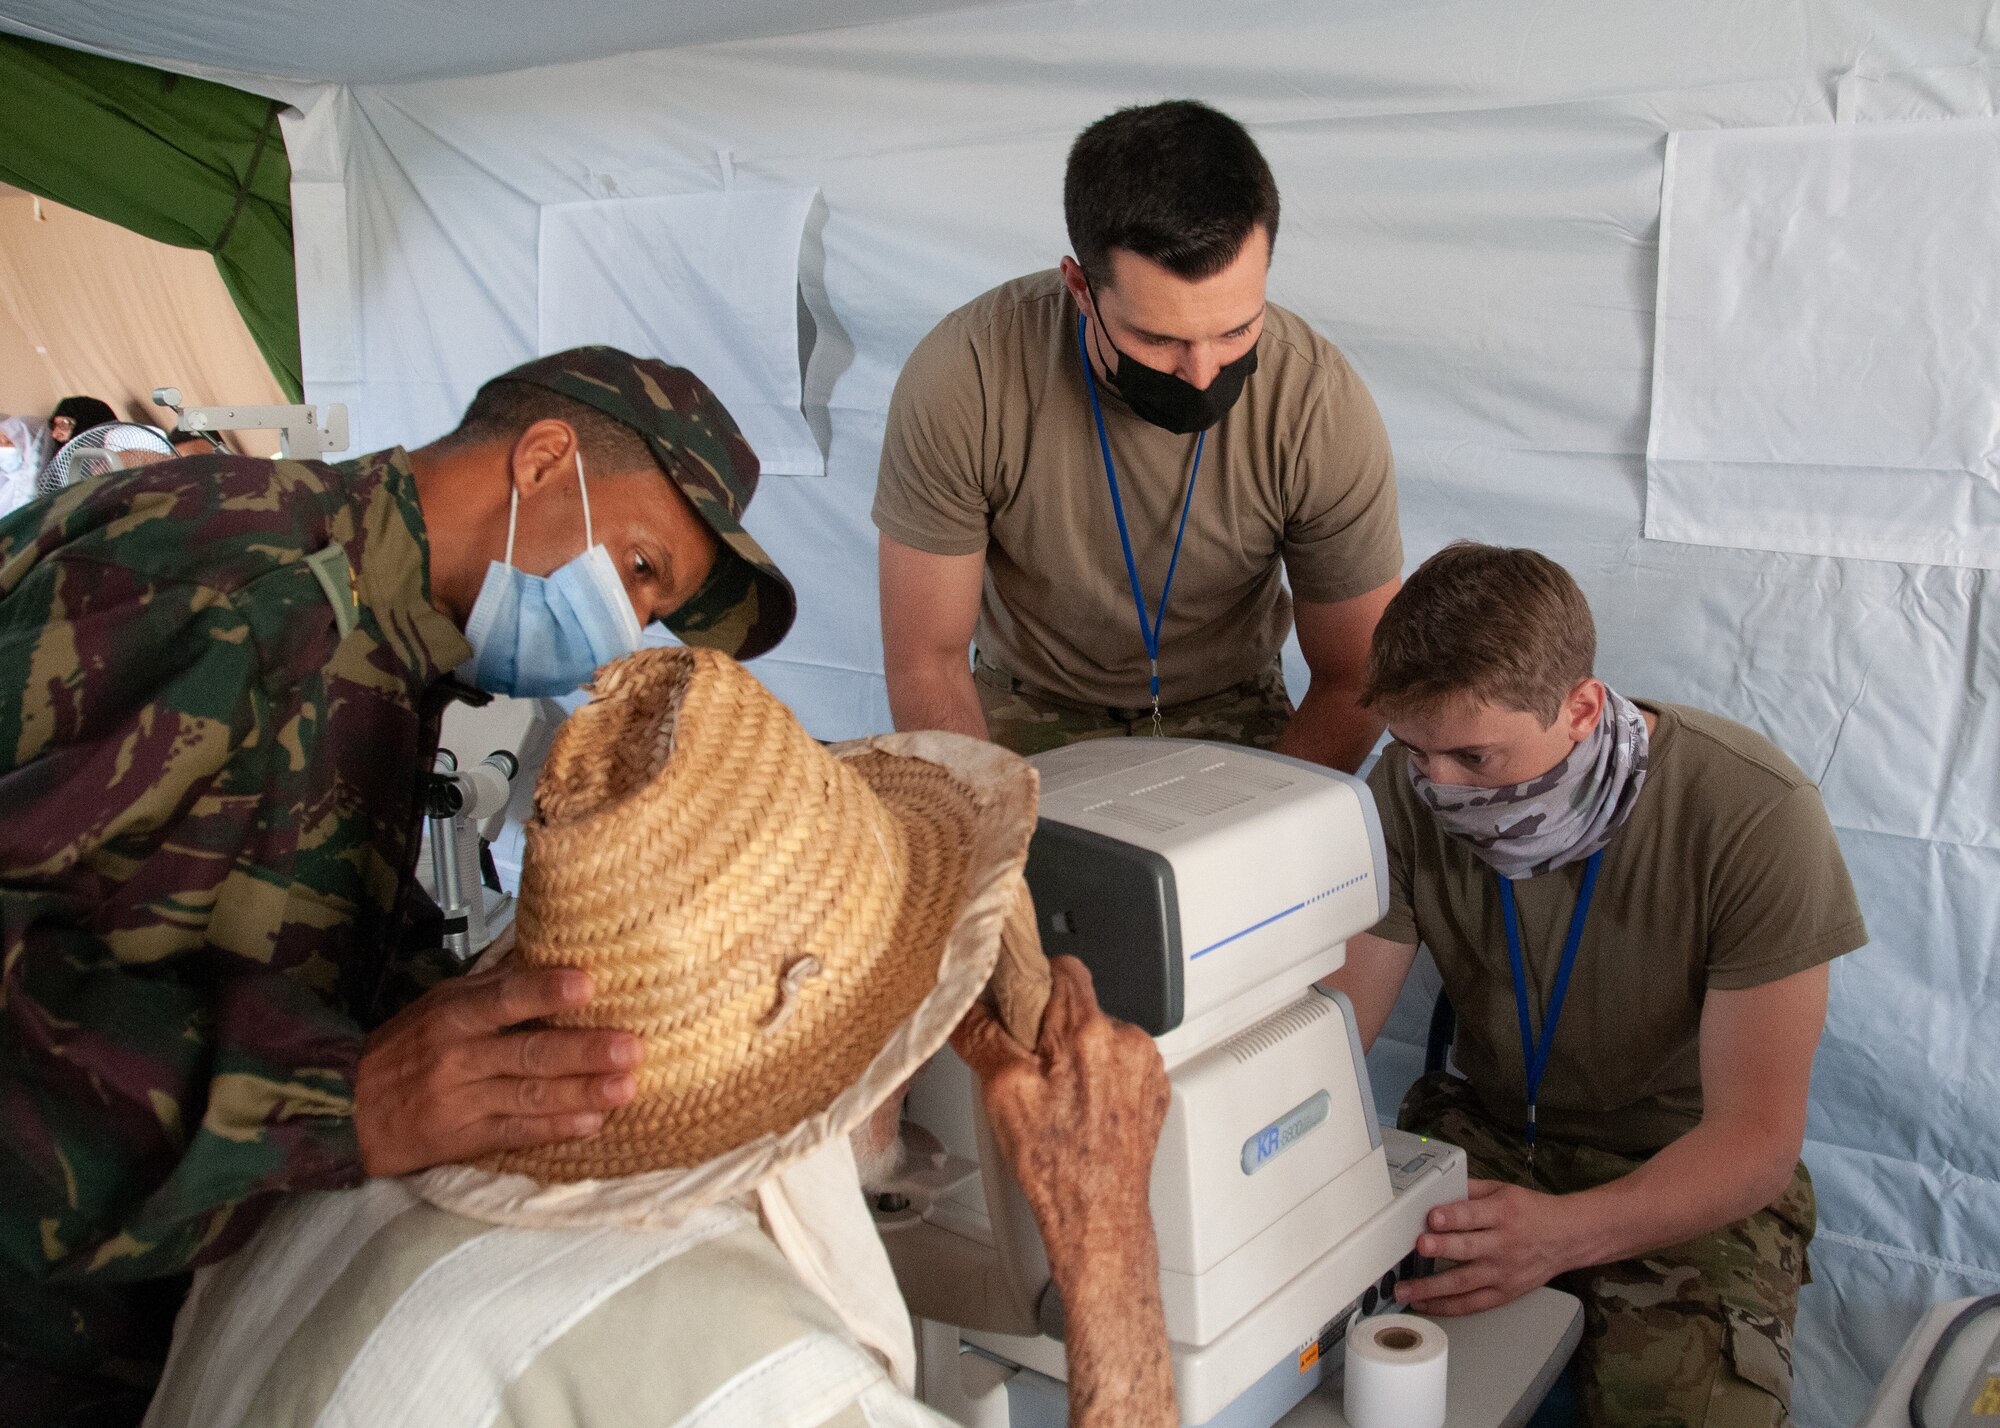 U.S. Military members conduct medical treatment on Moroccan civilians.